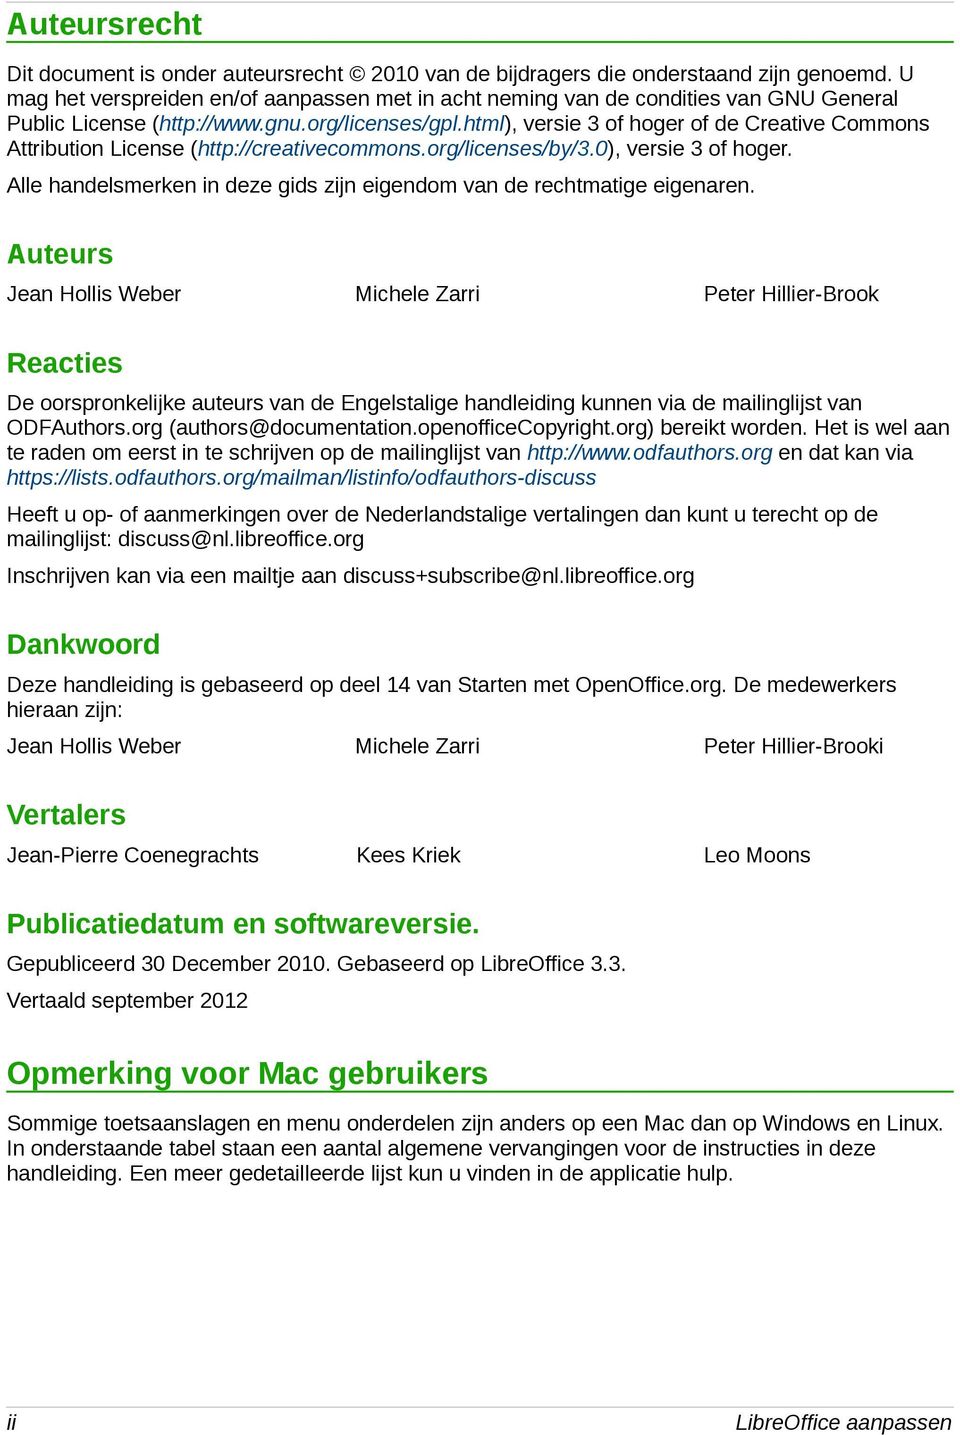 html), versie 3 of hoger of de Creative Commons Attribution License (http://creativecommons.org/licenses/by/3.0), versie 3 of hoger.